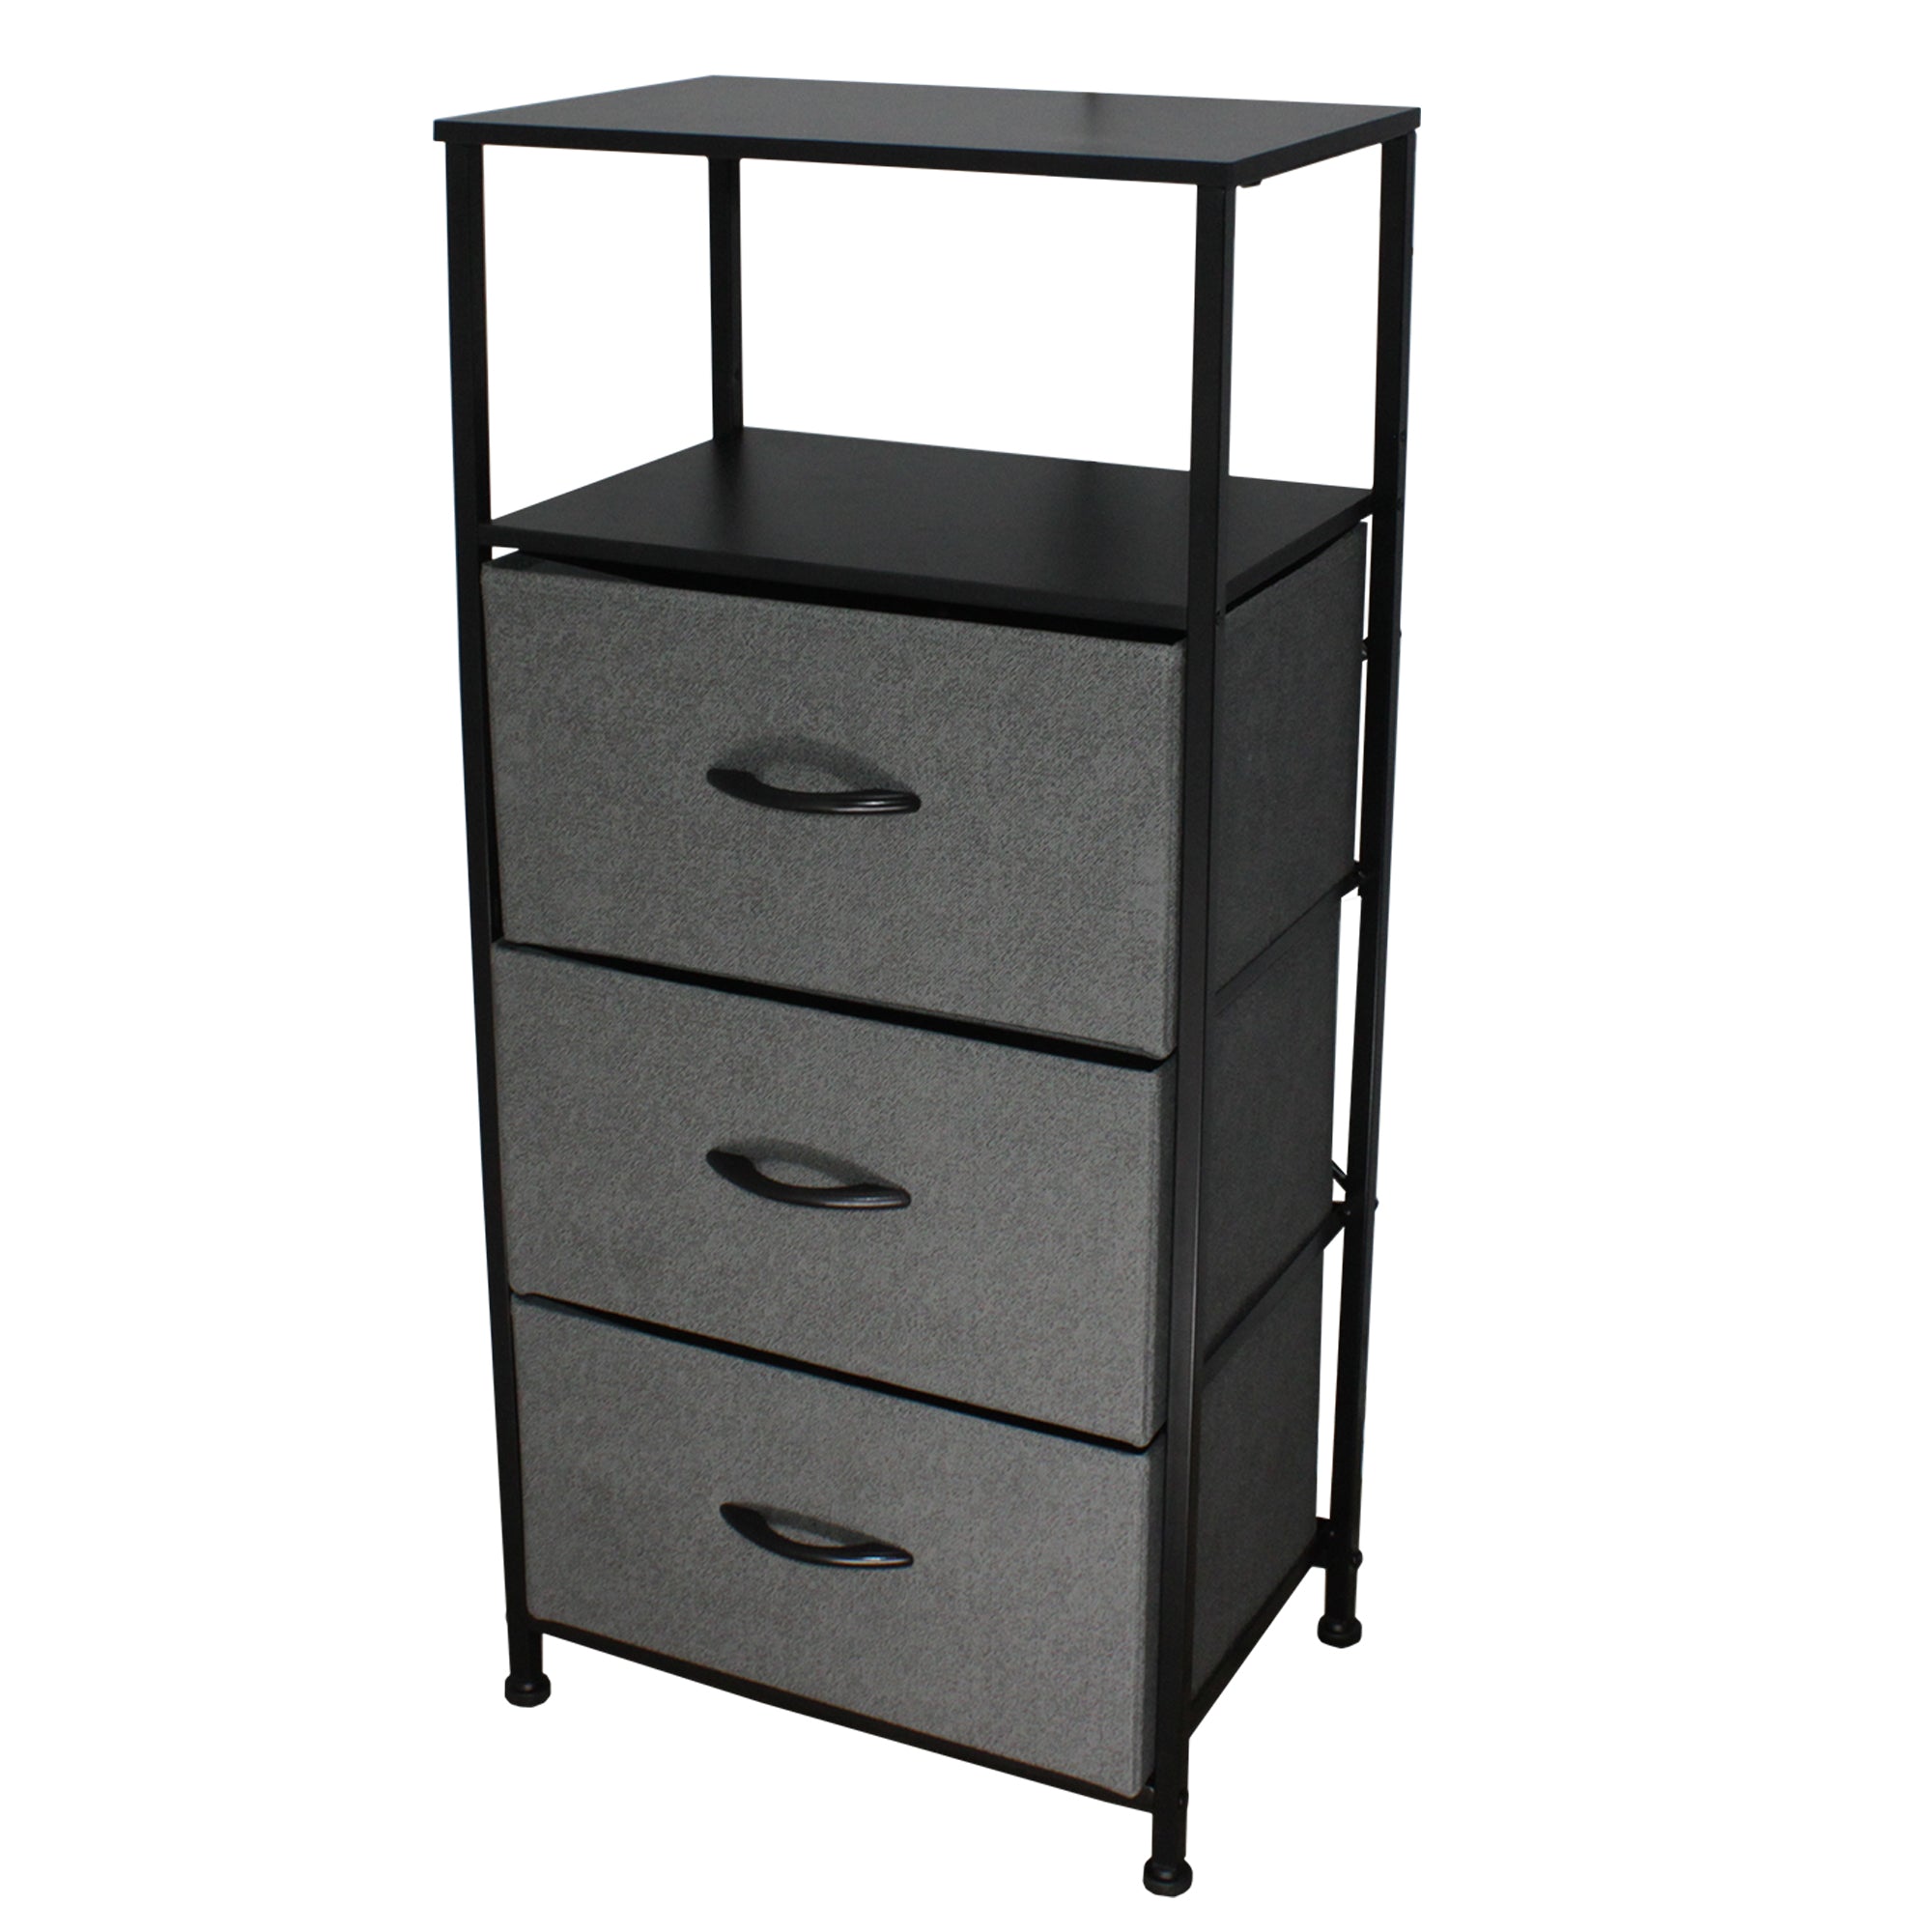 LMA Branded Economical Metal Frame & Fabric - 3 Drawer Cabinet BLK/GRY